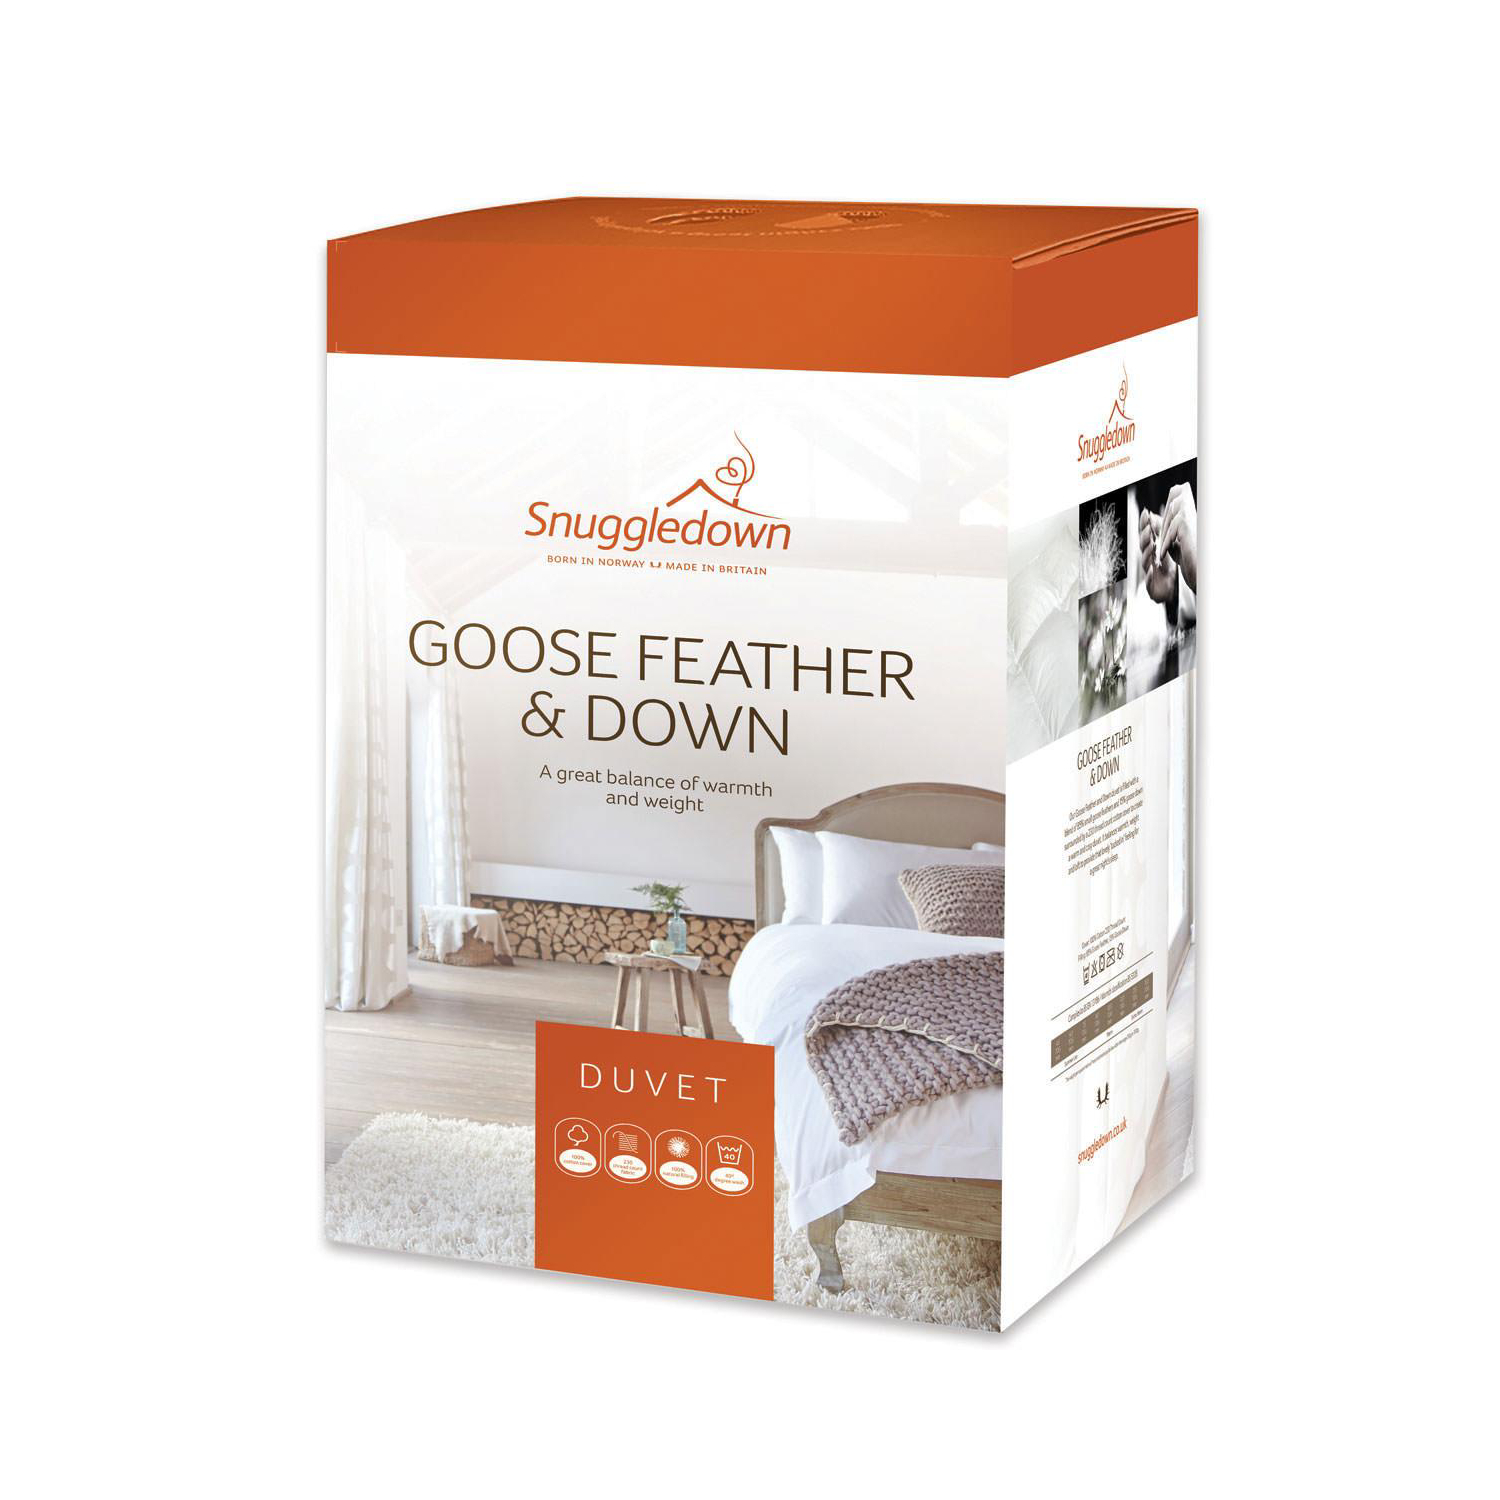 Goose Feather and Down Duvet 13.5 Tog